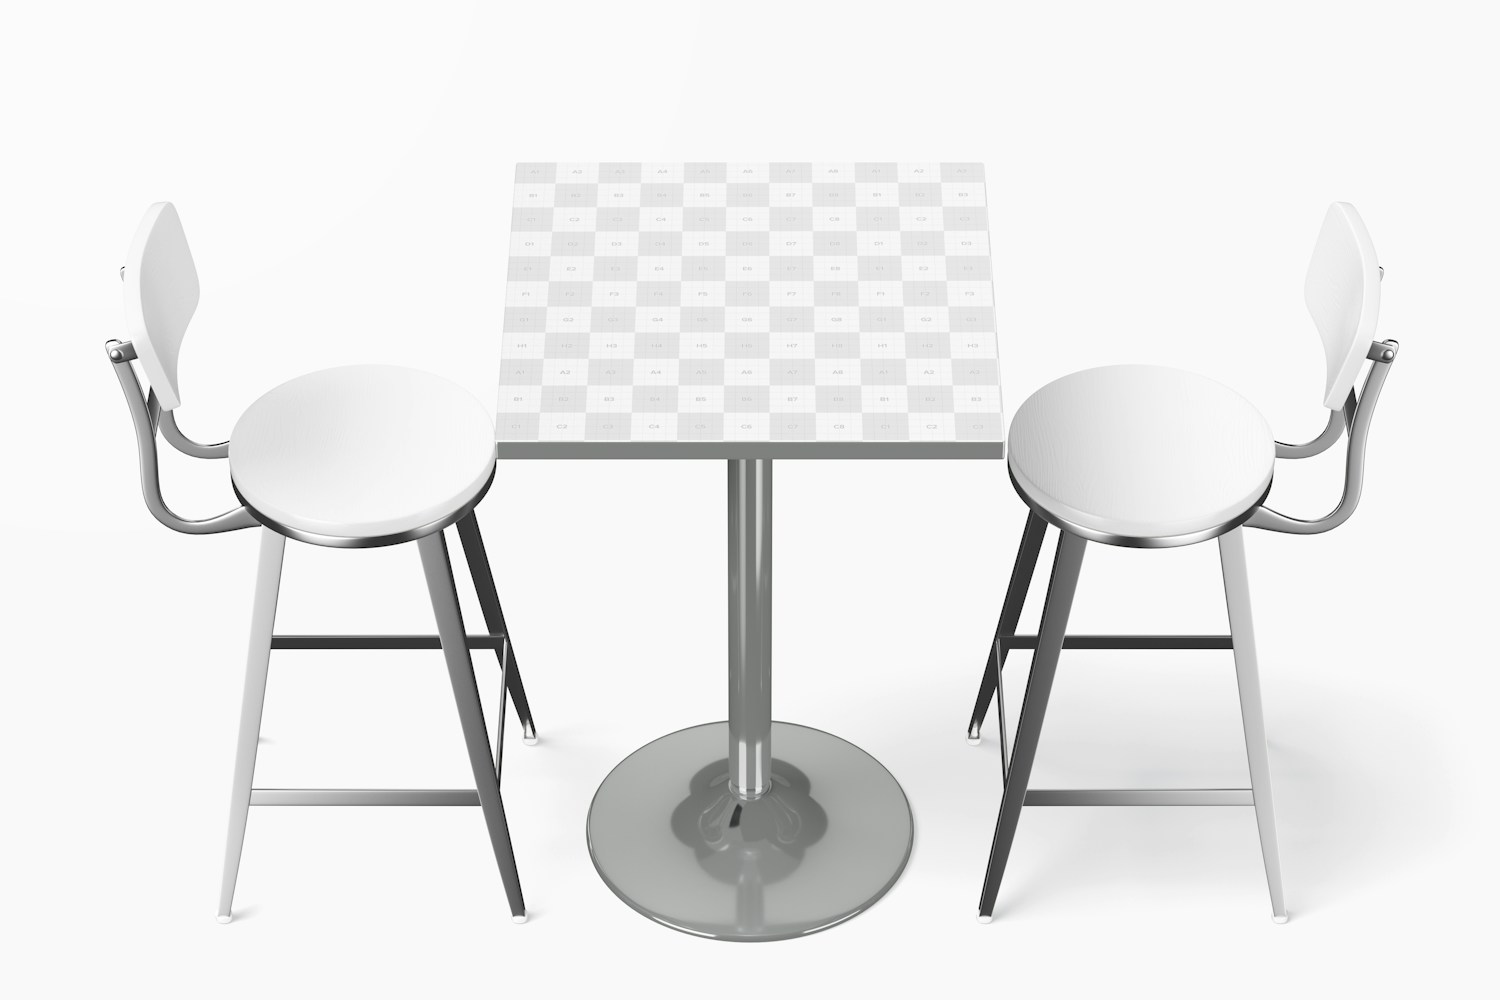 Square High Bar Table Mockup, Top View